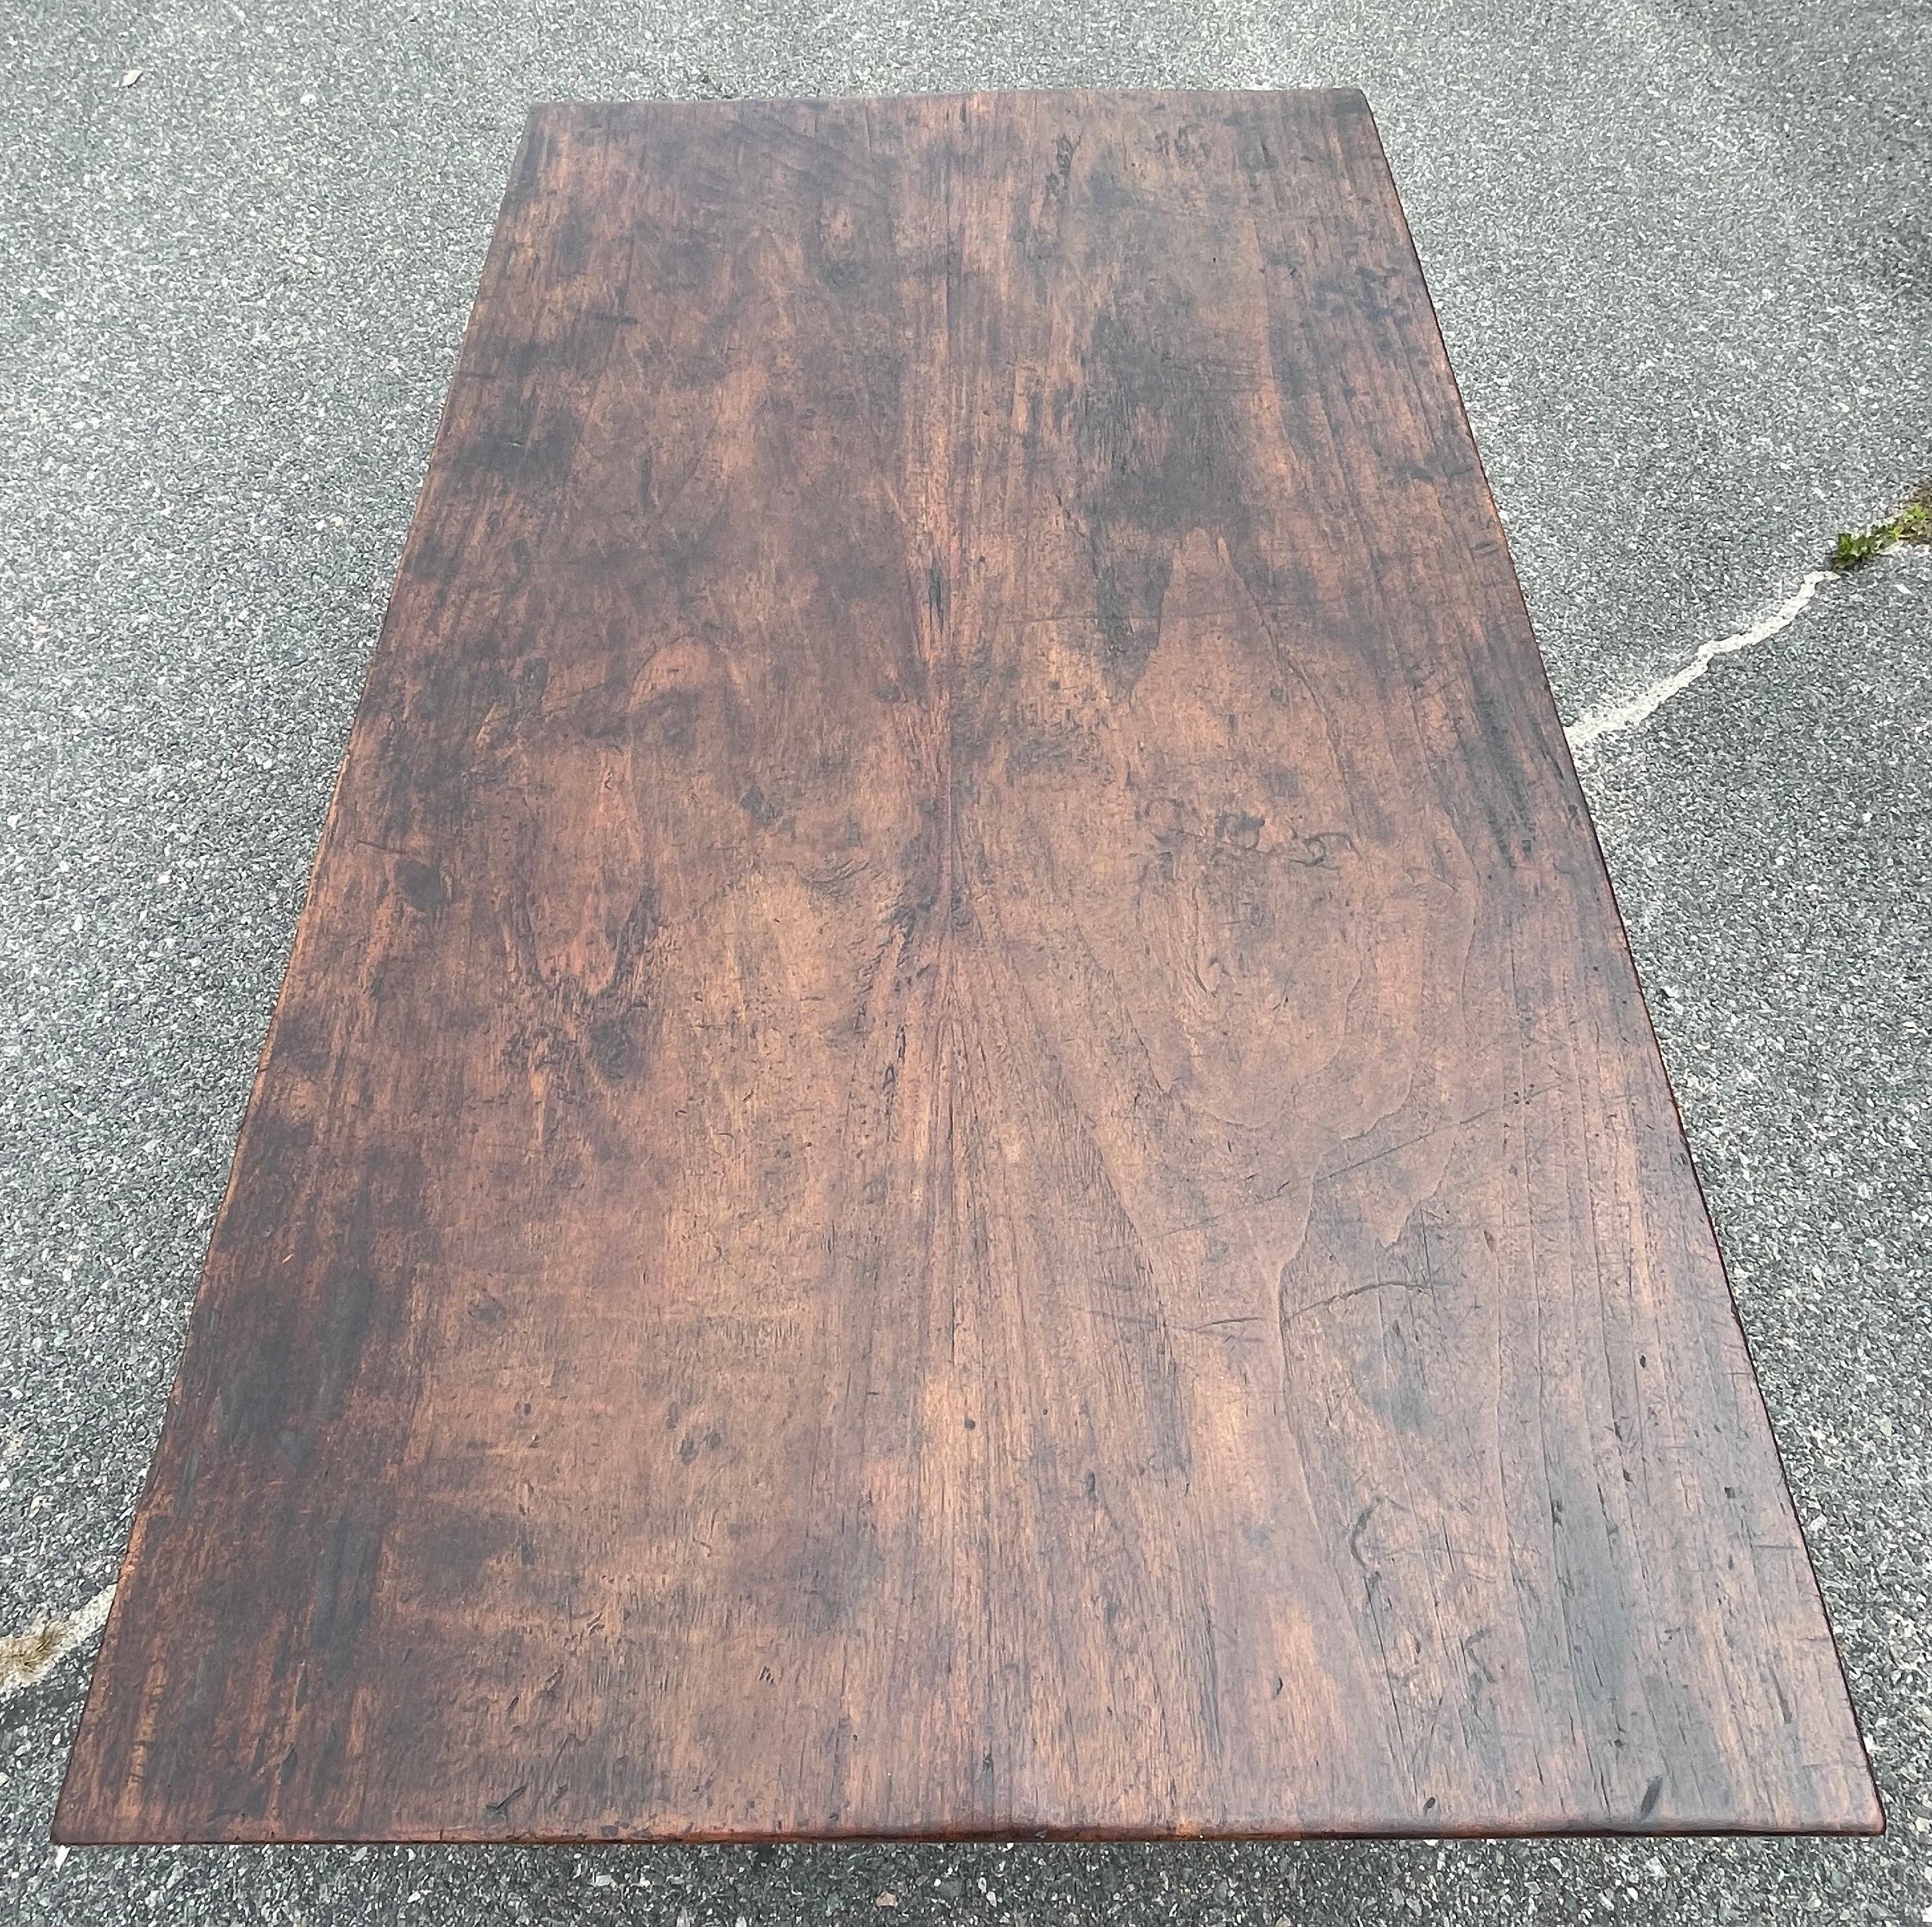 Large English Oak Coffee Table with Single Drawer In Excellent Condition For Sale In Nantucket, MA